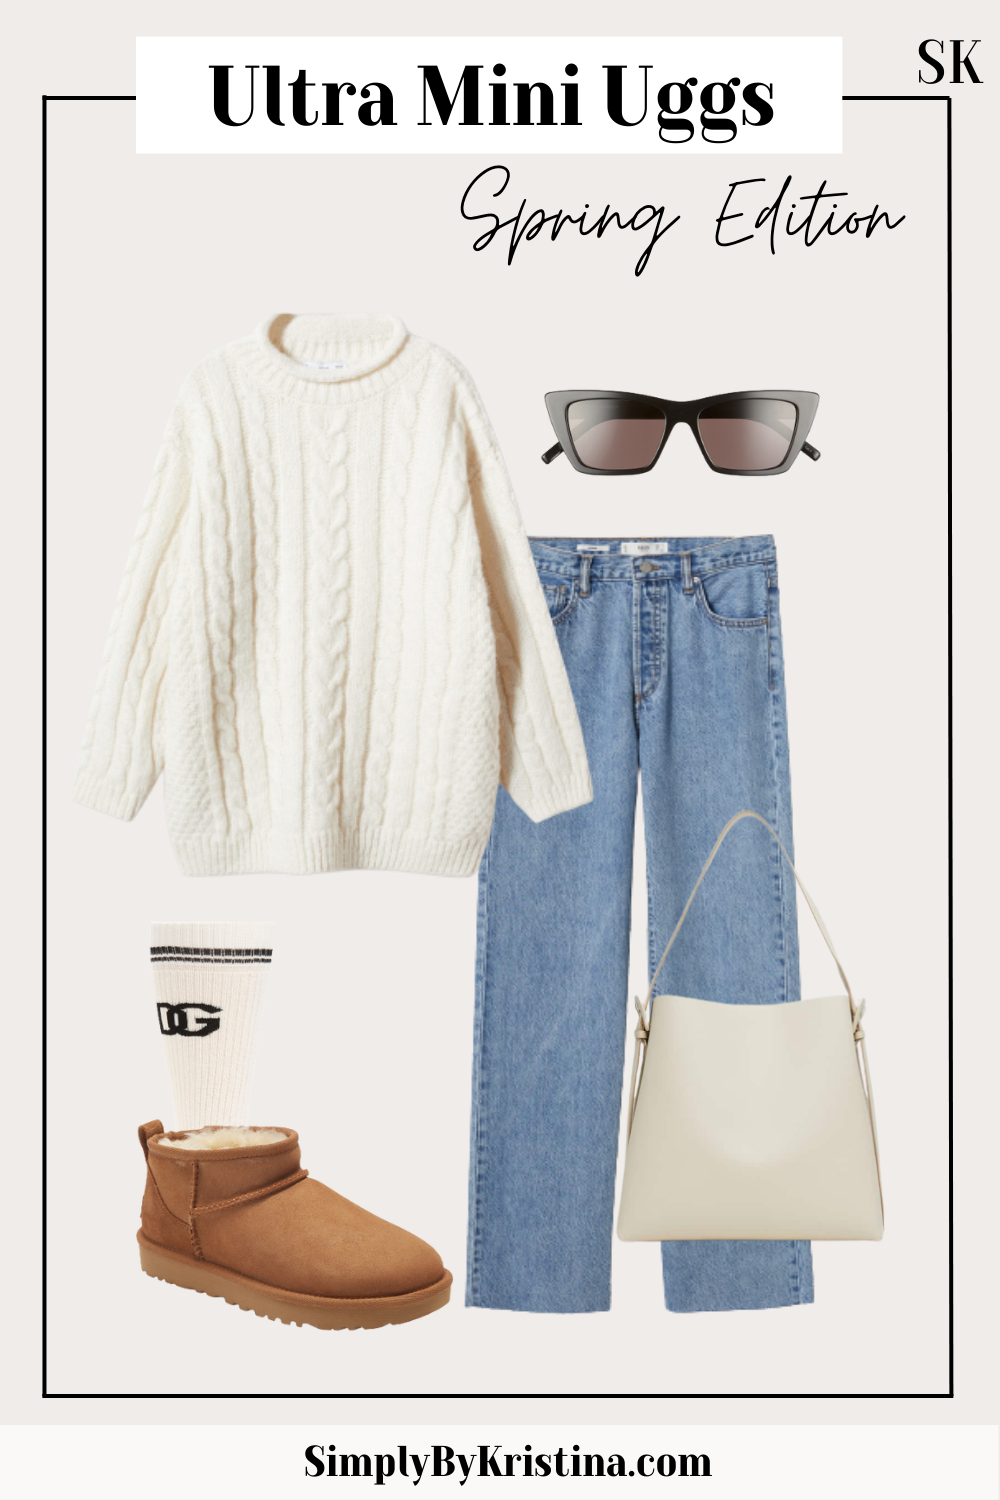 What To Wear With Ultra Mini Ugg Boots - Spring Edition, spring outfit ideas combinations and images